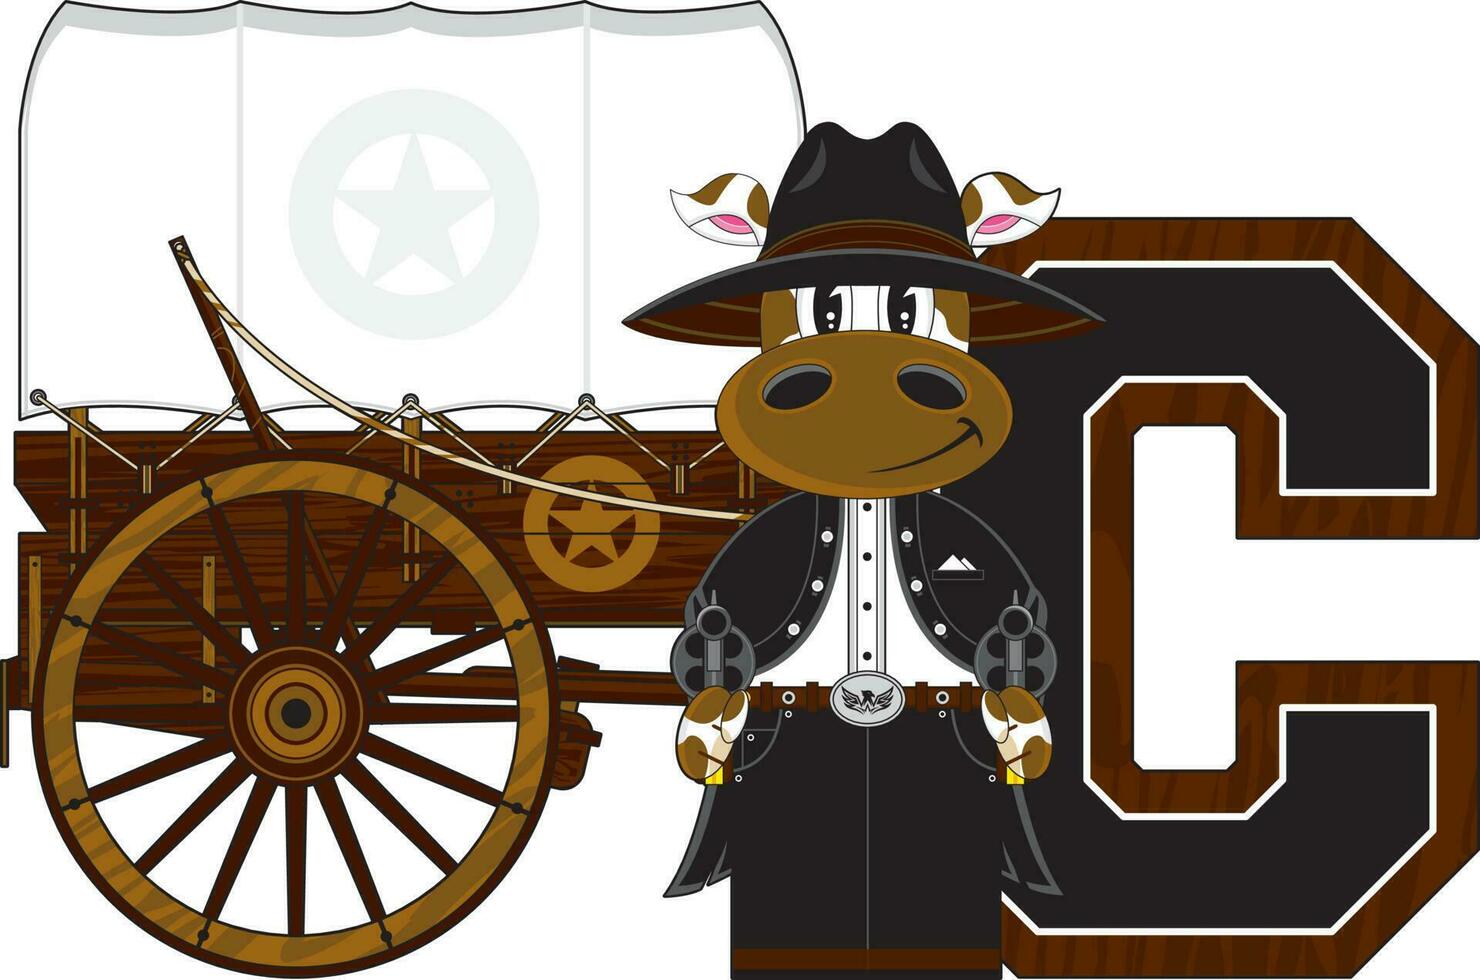 C is for Cow Cowboy on Horse Wild West Alphabet Learning Educational Illustration vector